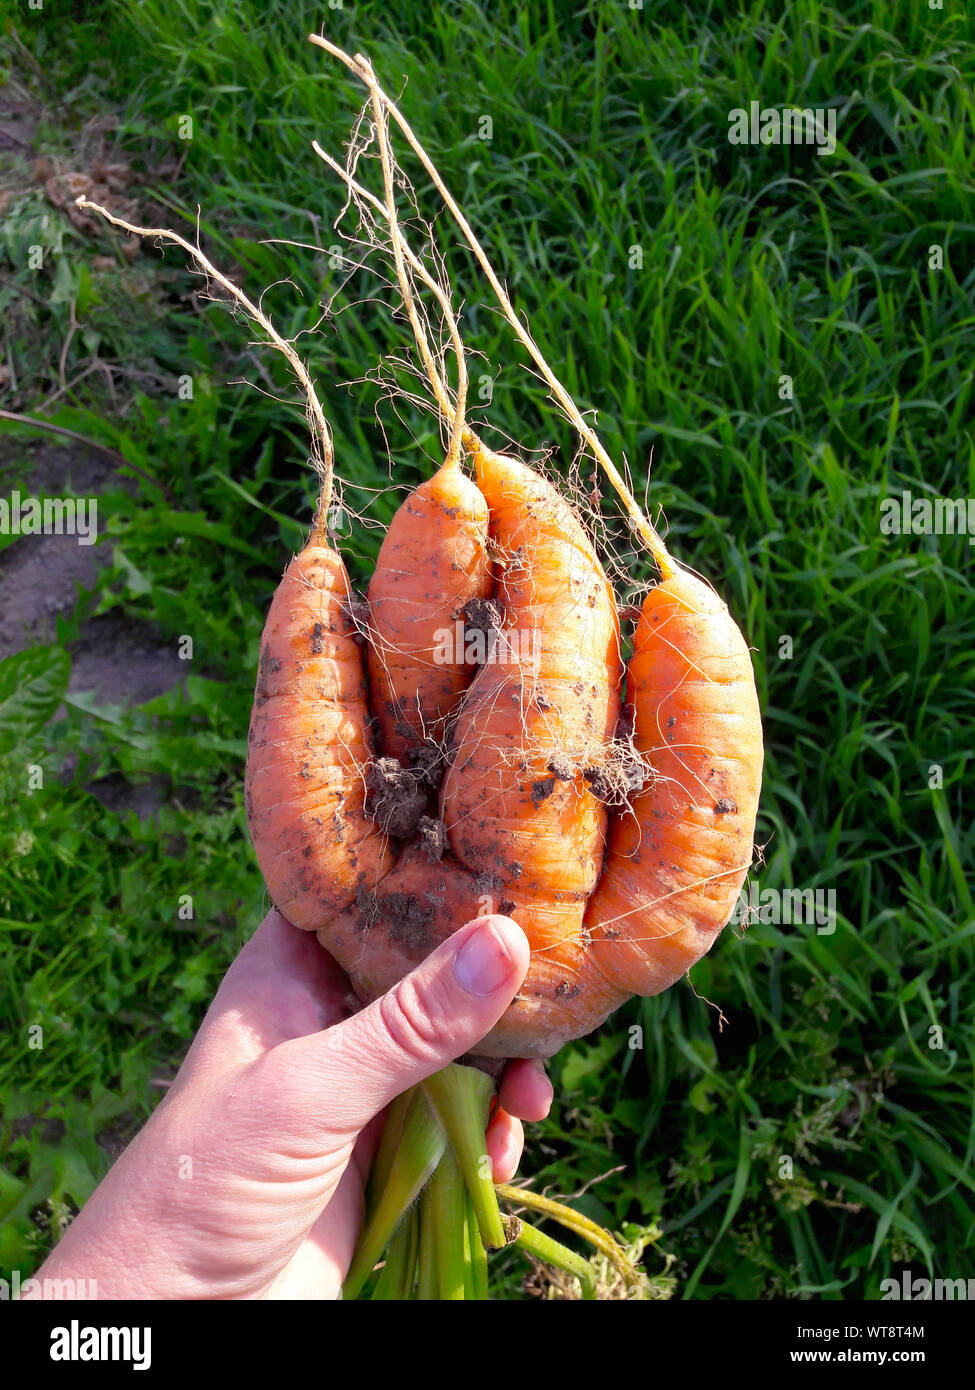 Odd looking weird mutant uneven carrots in hand outdoors, green grass on the background. Rejected food in markets stores concept. Low quality foods. Stock Photo